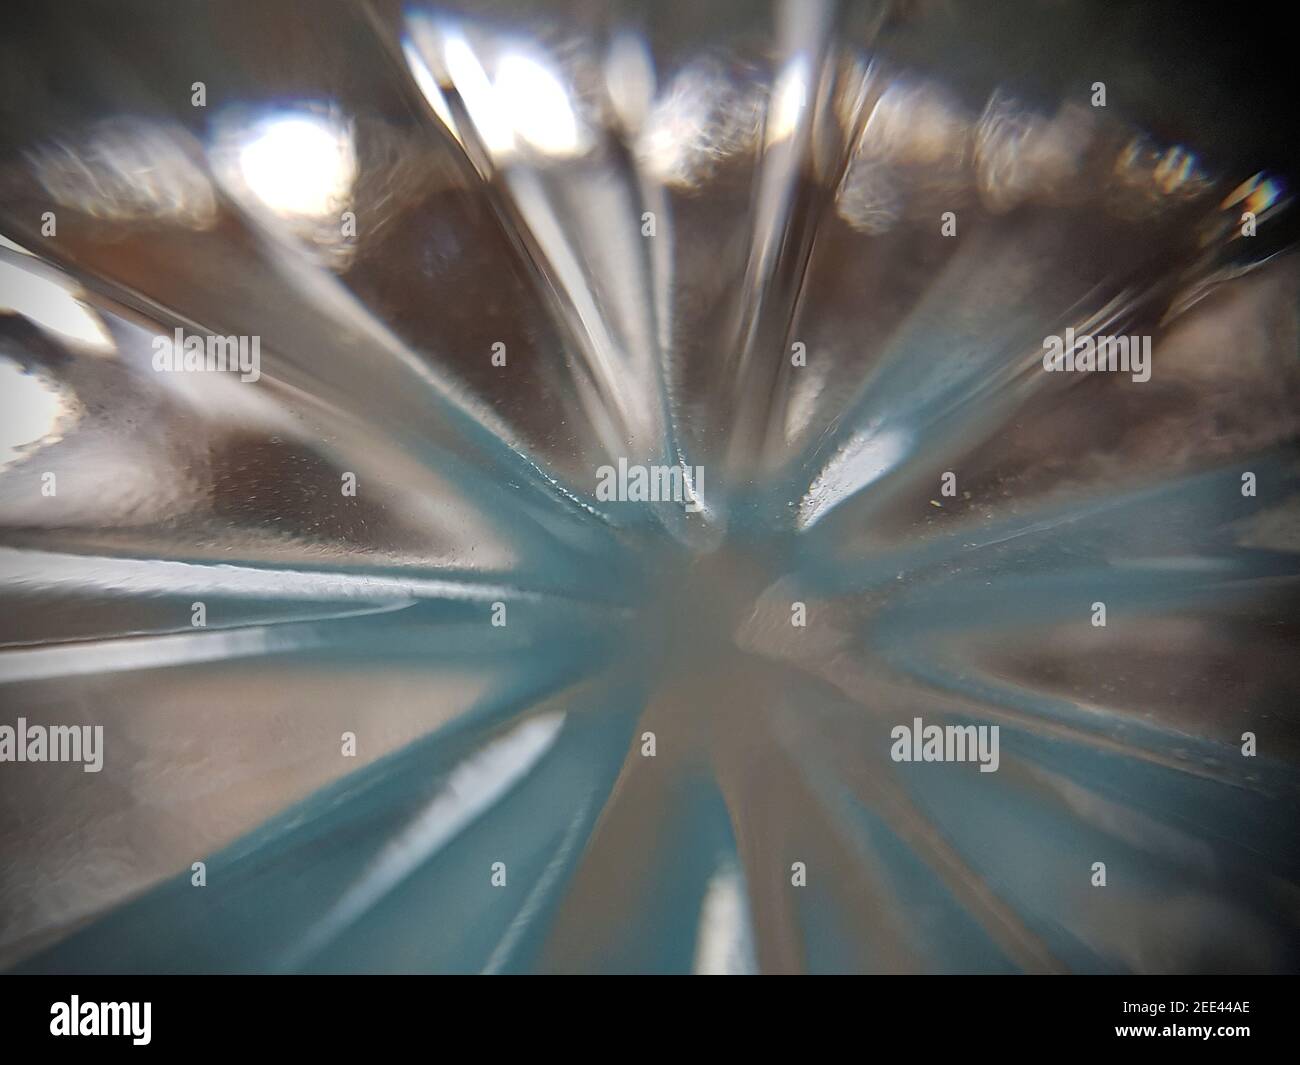 Starr burst of light with a blue tinge. This is light from the bottom of a glass Stock Photo